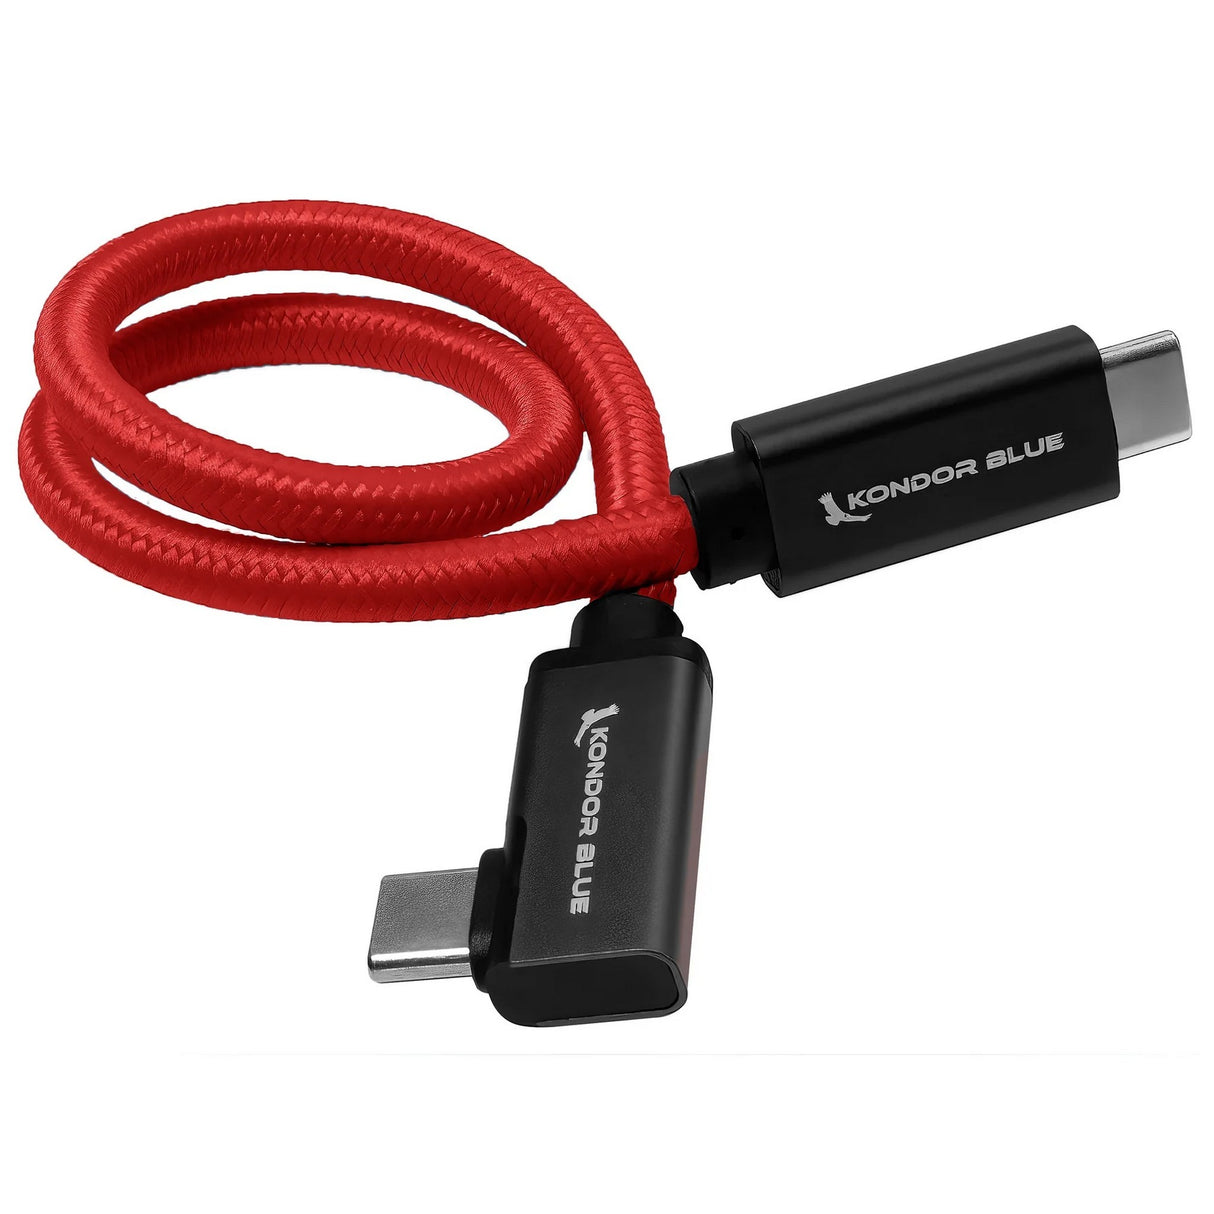 Kondor Blue USB C to USB C High Speed Cable for SSD Recording, 12 Inch Right Angle, Cardinal Red